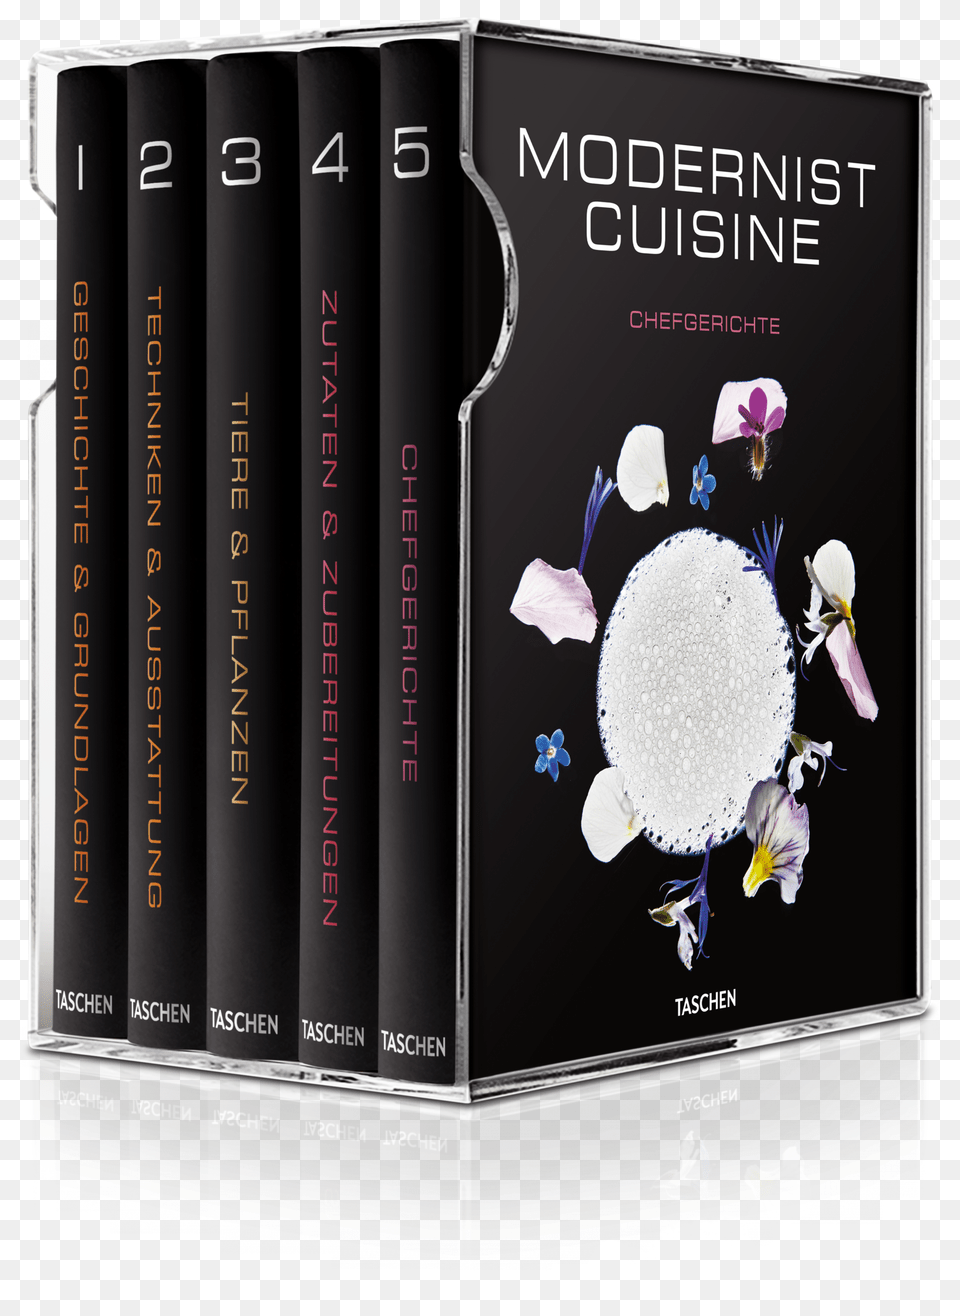 The Art And Science Of Cooking Livre Modernist Cuisine, Book, Publication, Advertisement Png Image